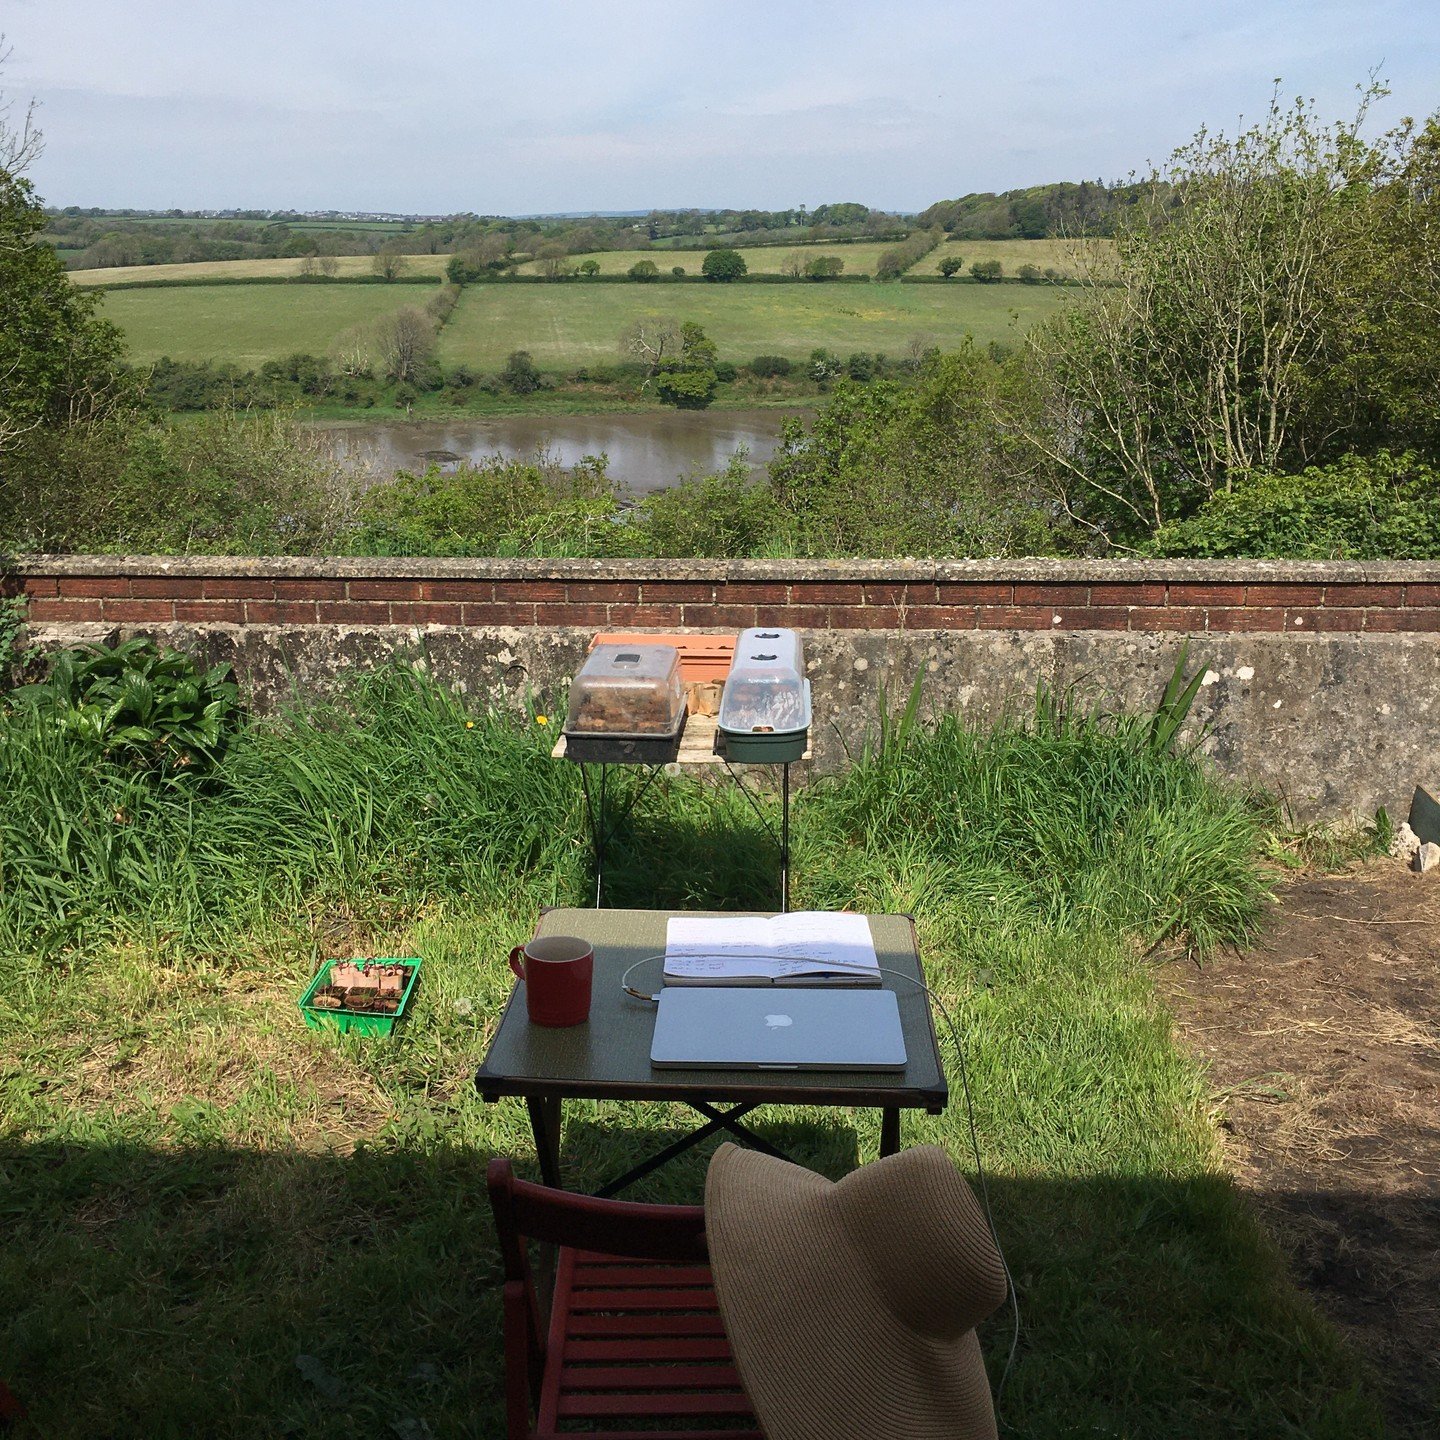 My office for today 😊🌞

#may #pembrokeshire #inthegraden #springgarden #workingfromhome